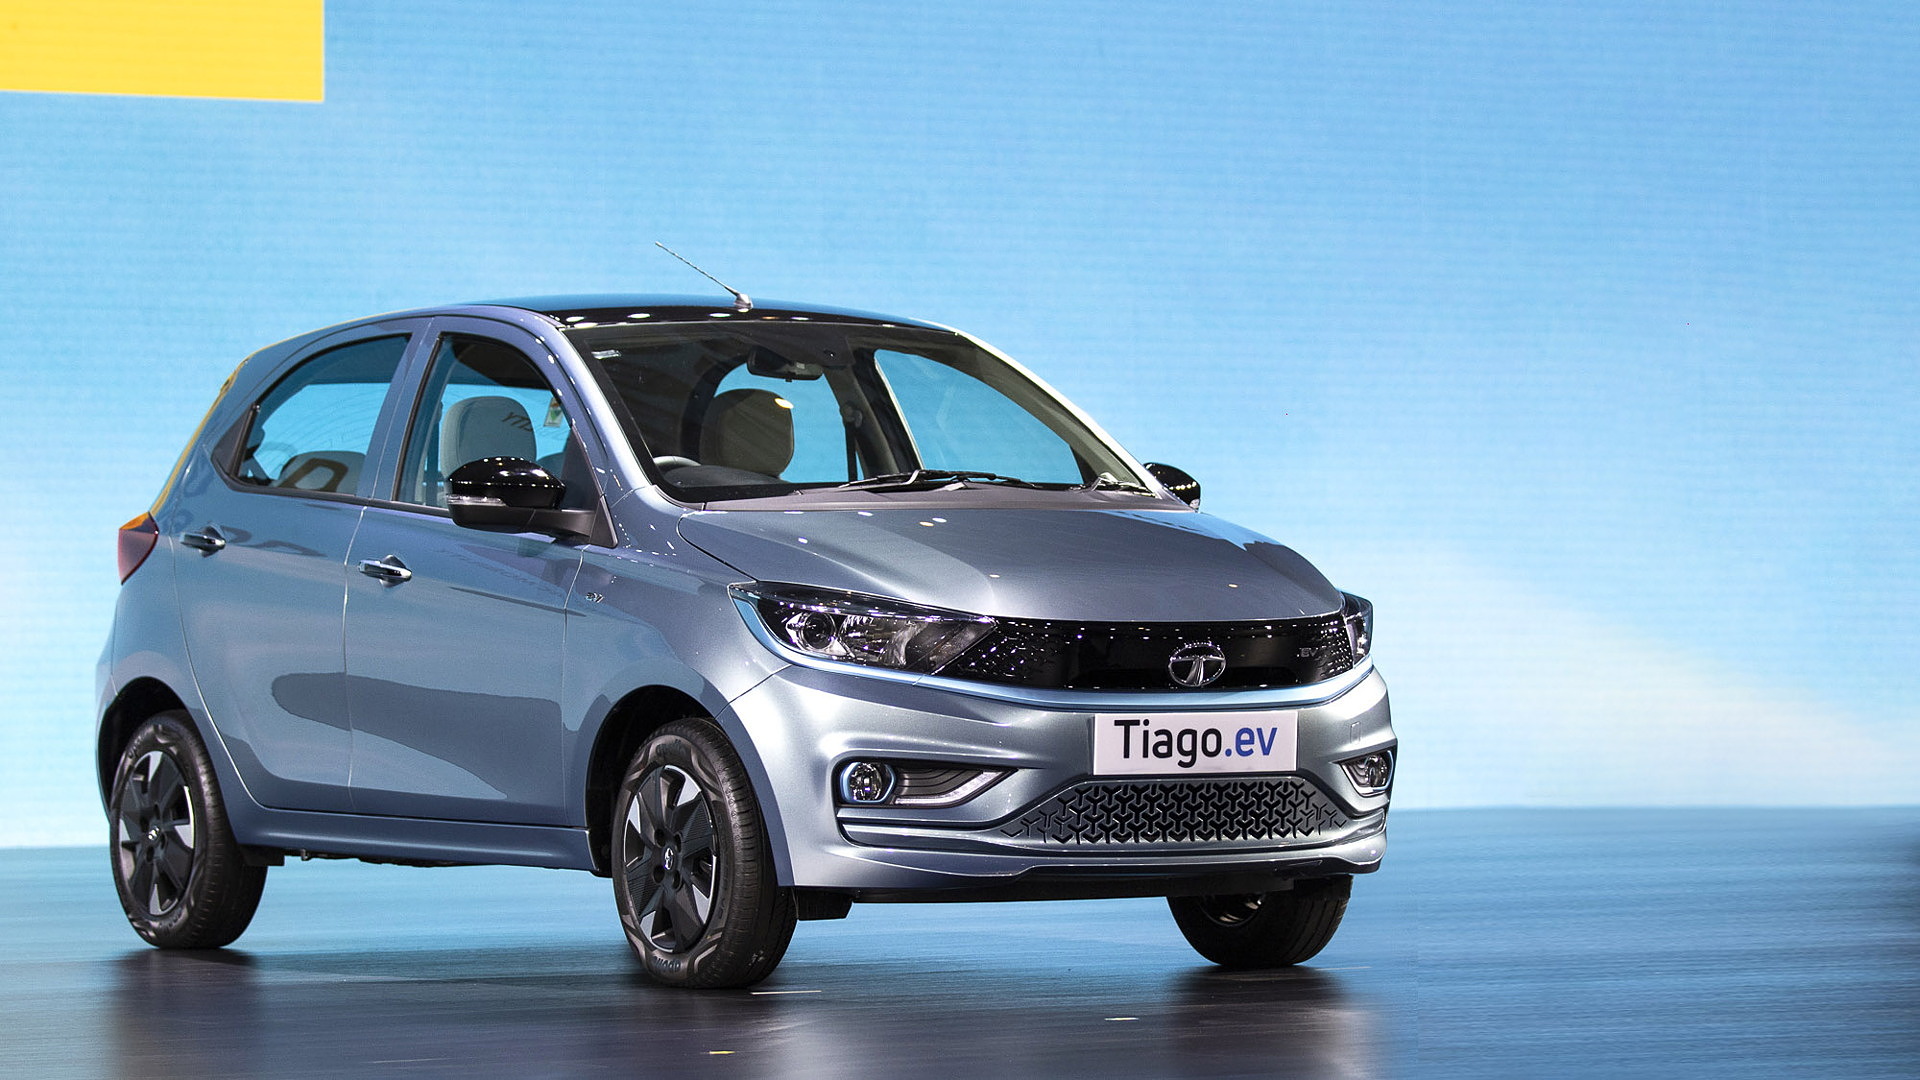 Tata Tiago Ev is the most affordable electric car from the brand